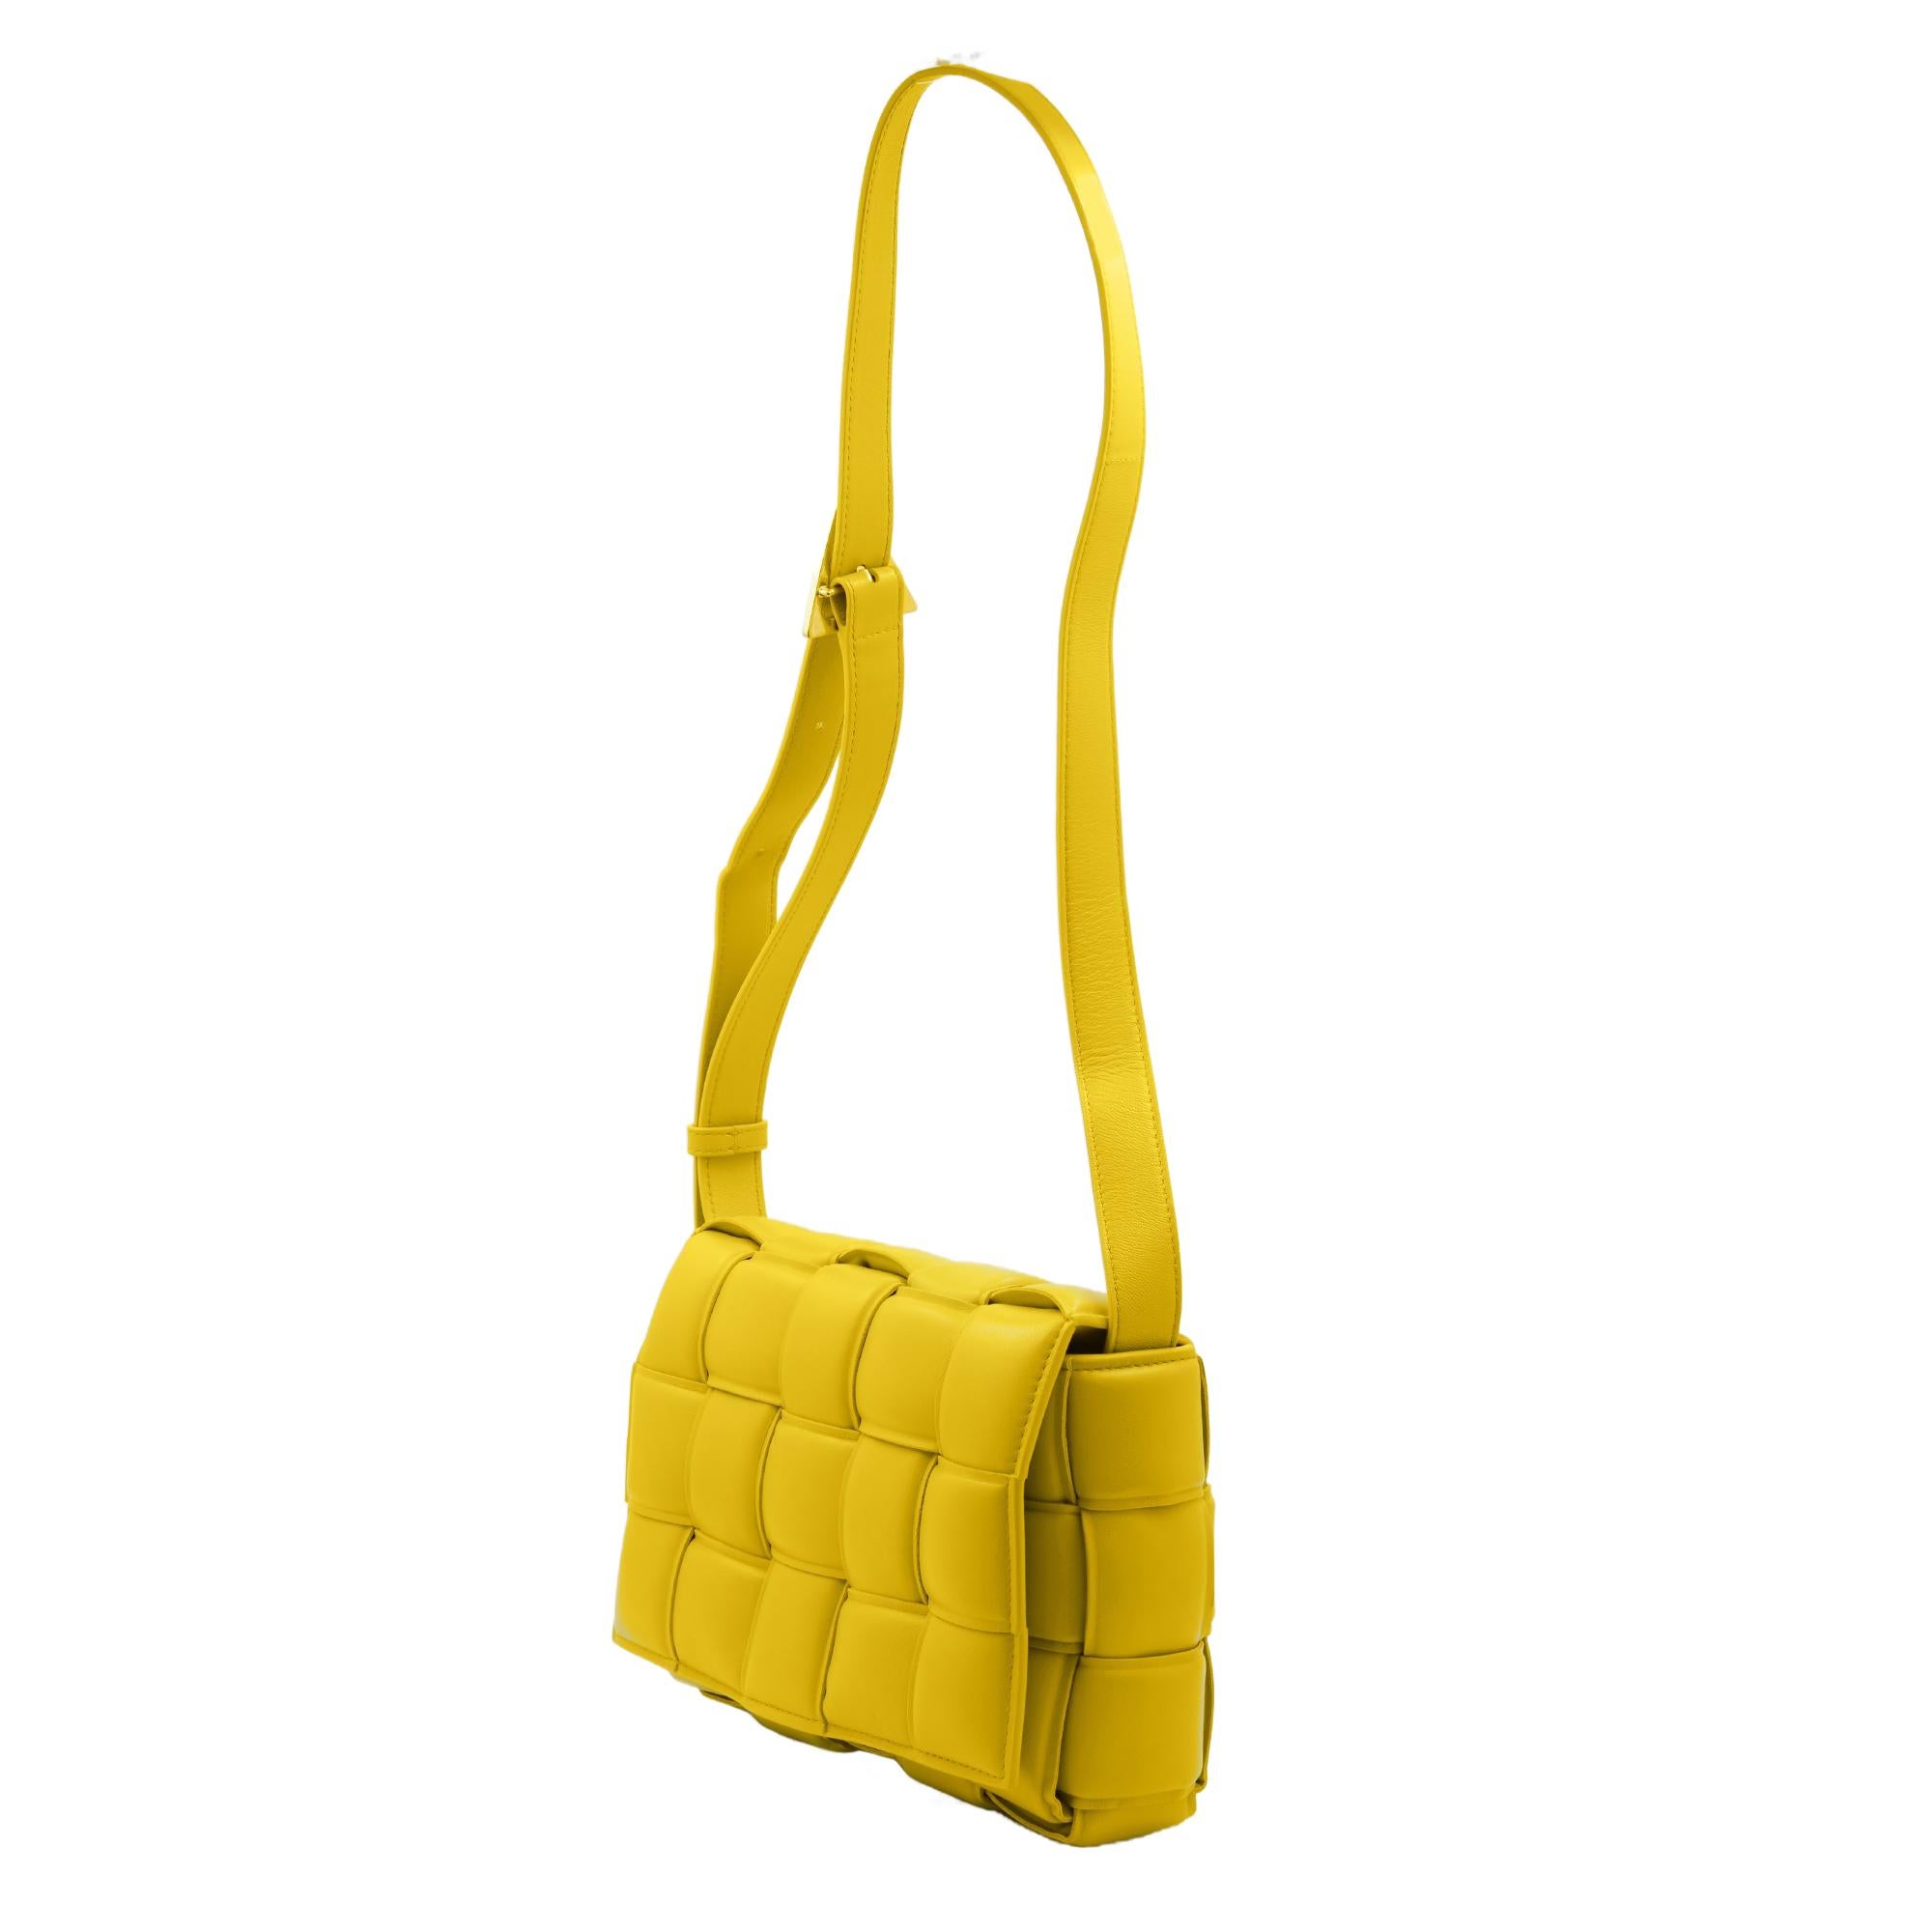 The famous Bottega Veneta Cassette Padded lambskin yellow leather crossbody bag. Adjustable shoulder strap with gold-colored metal buckle closure. Front flap with magnetic snap button closure. One internal zip pocket. Made in Italy. Measurements: D